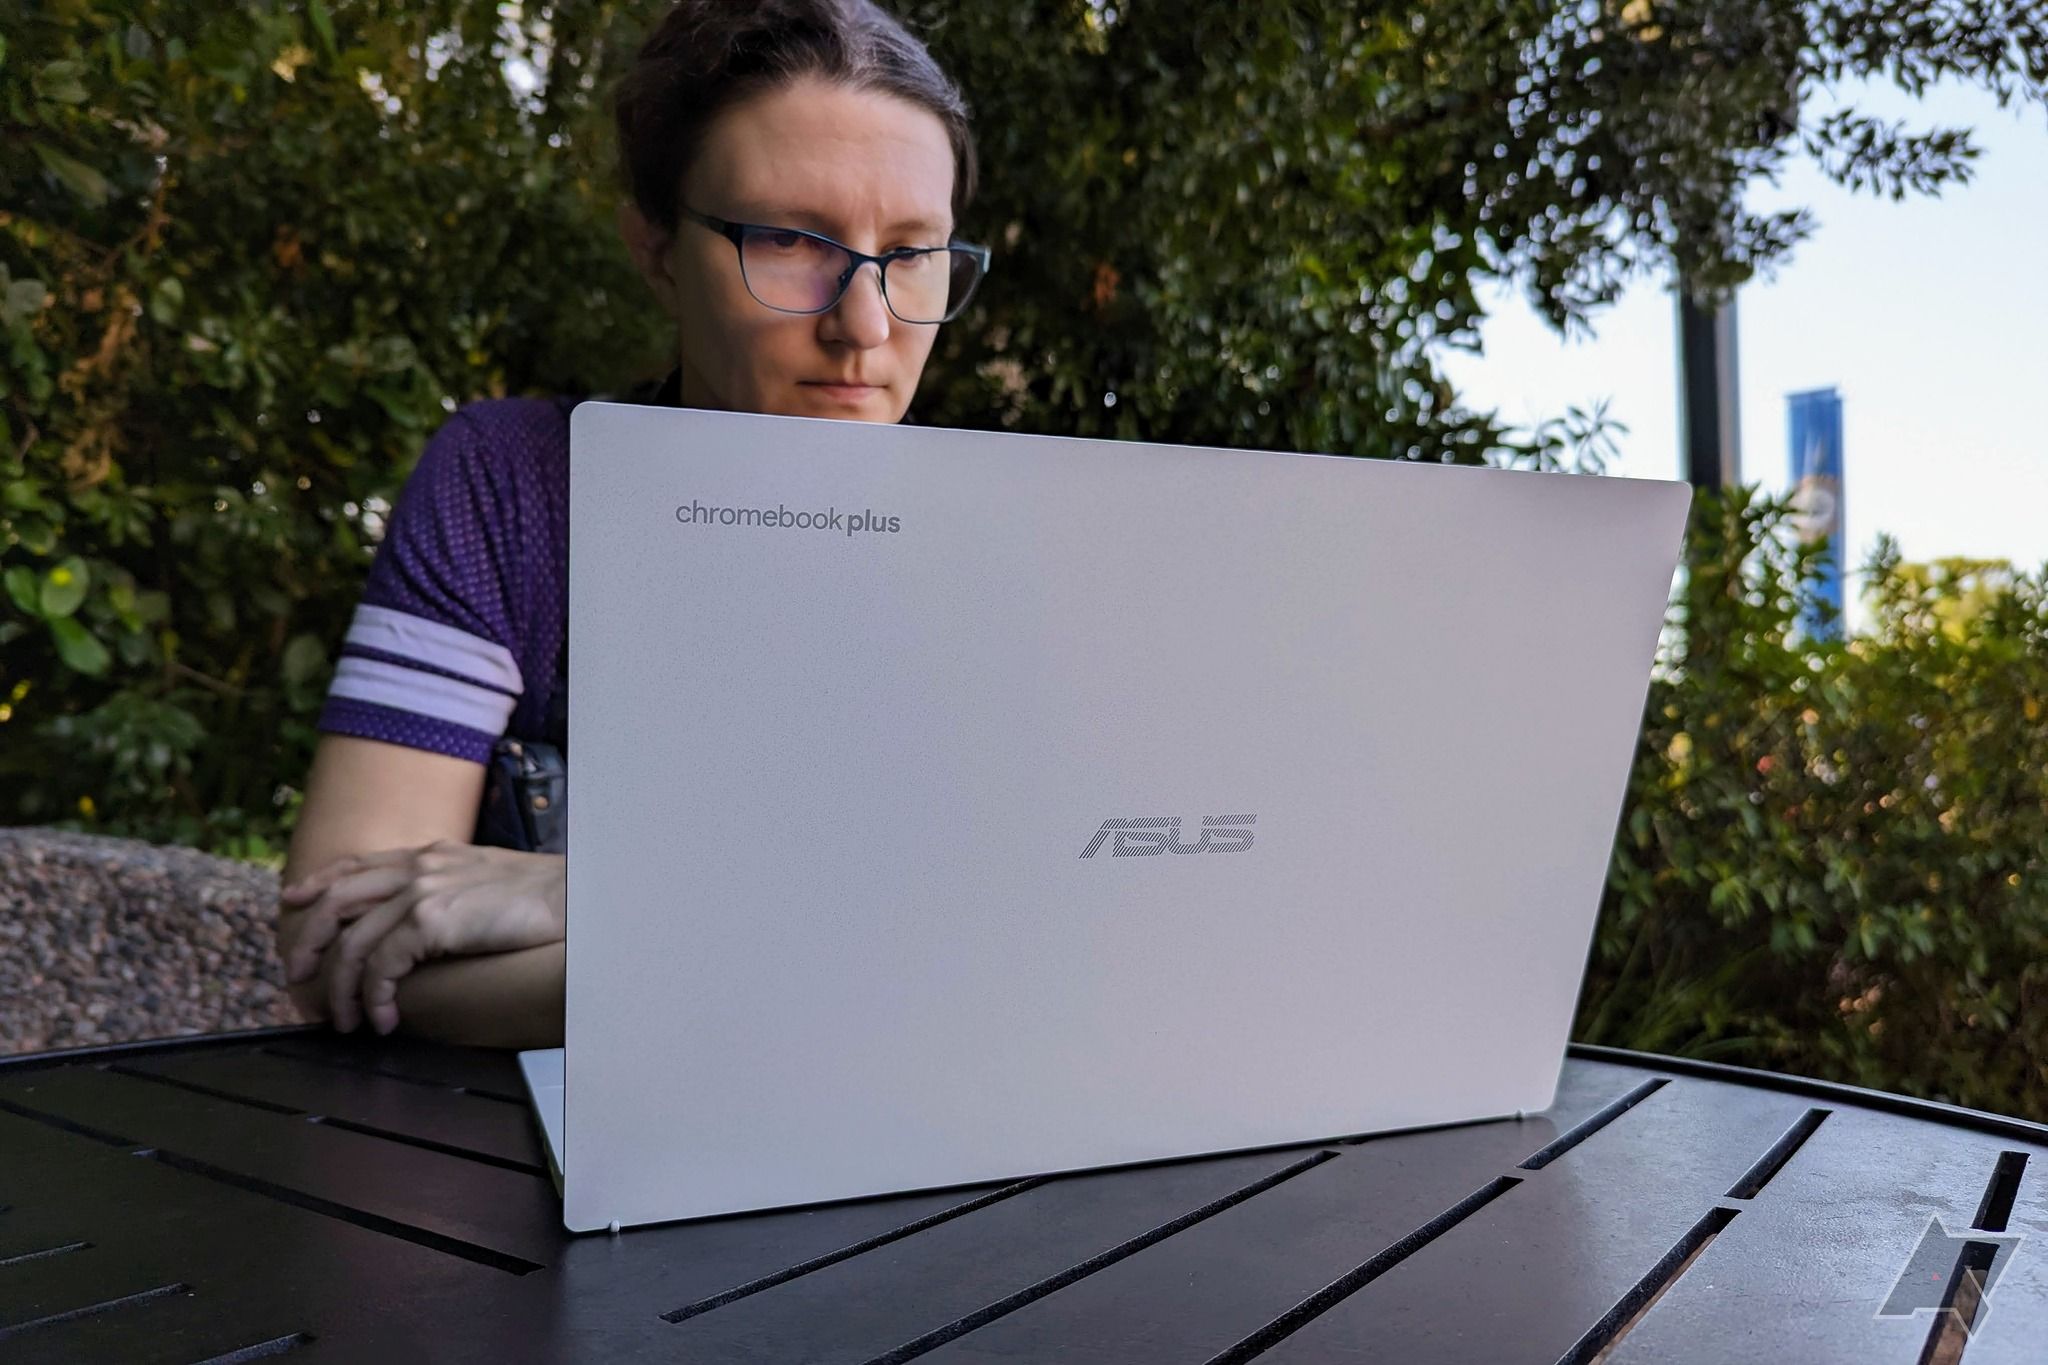 An Asus Chromebook Plus CX34 being used by a person sitting on a brown table outside